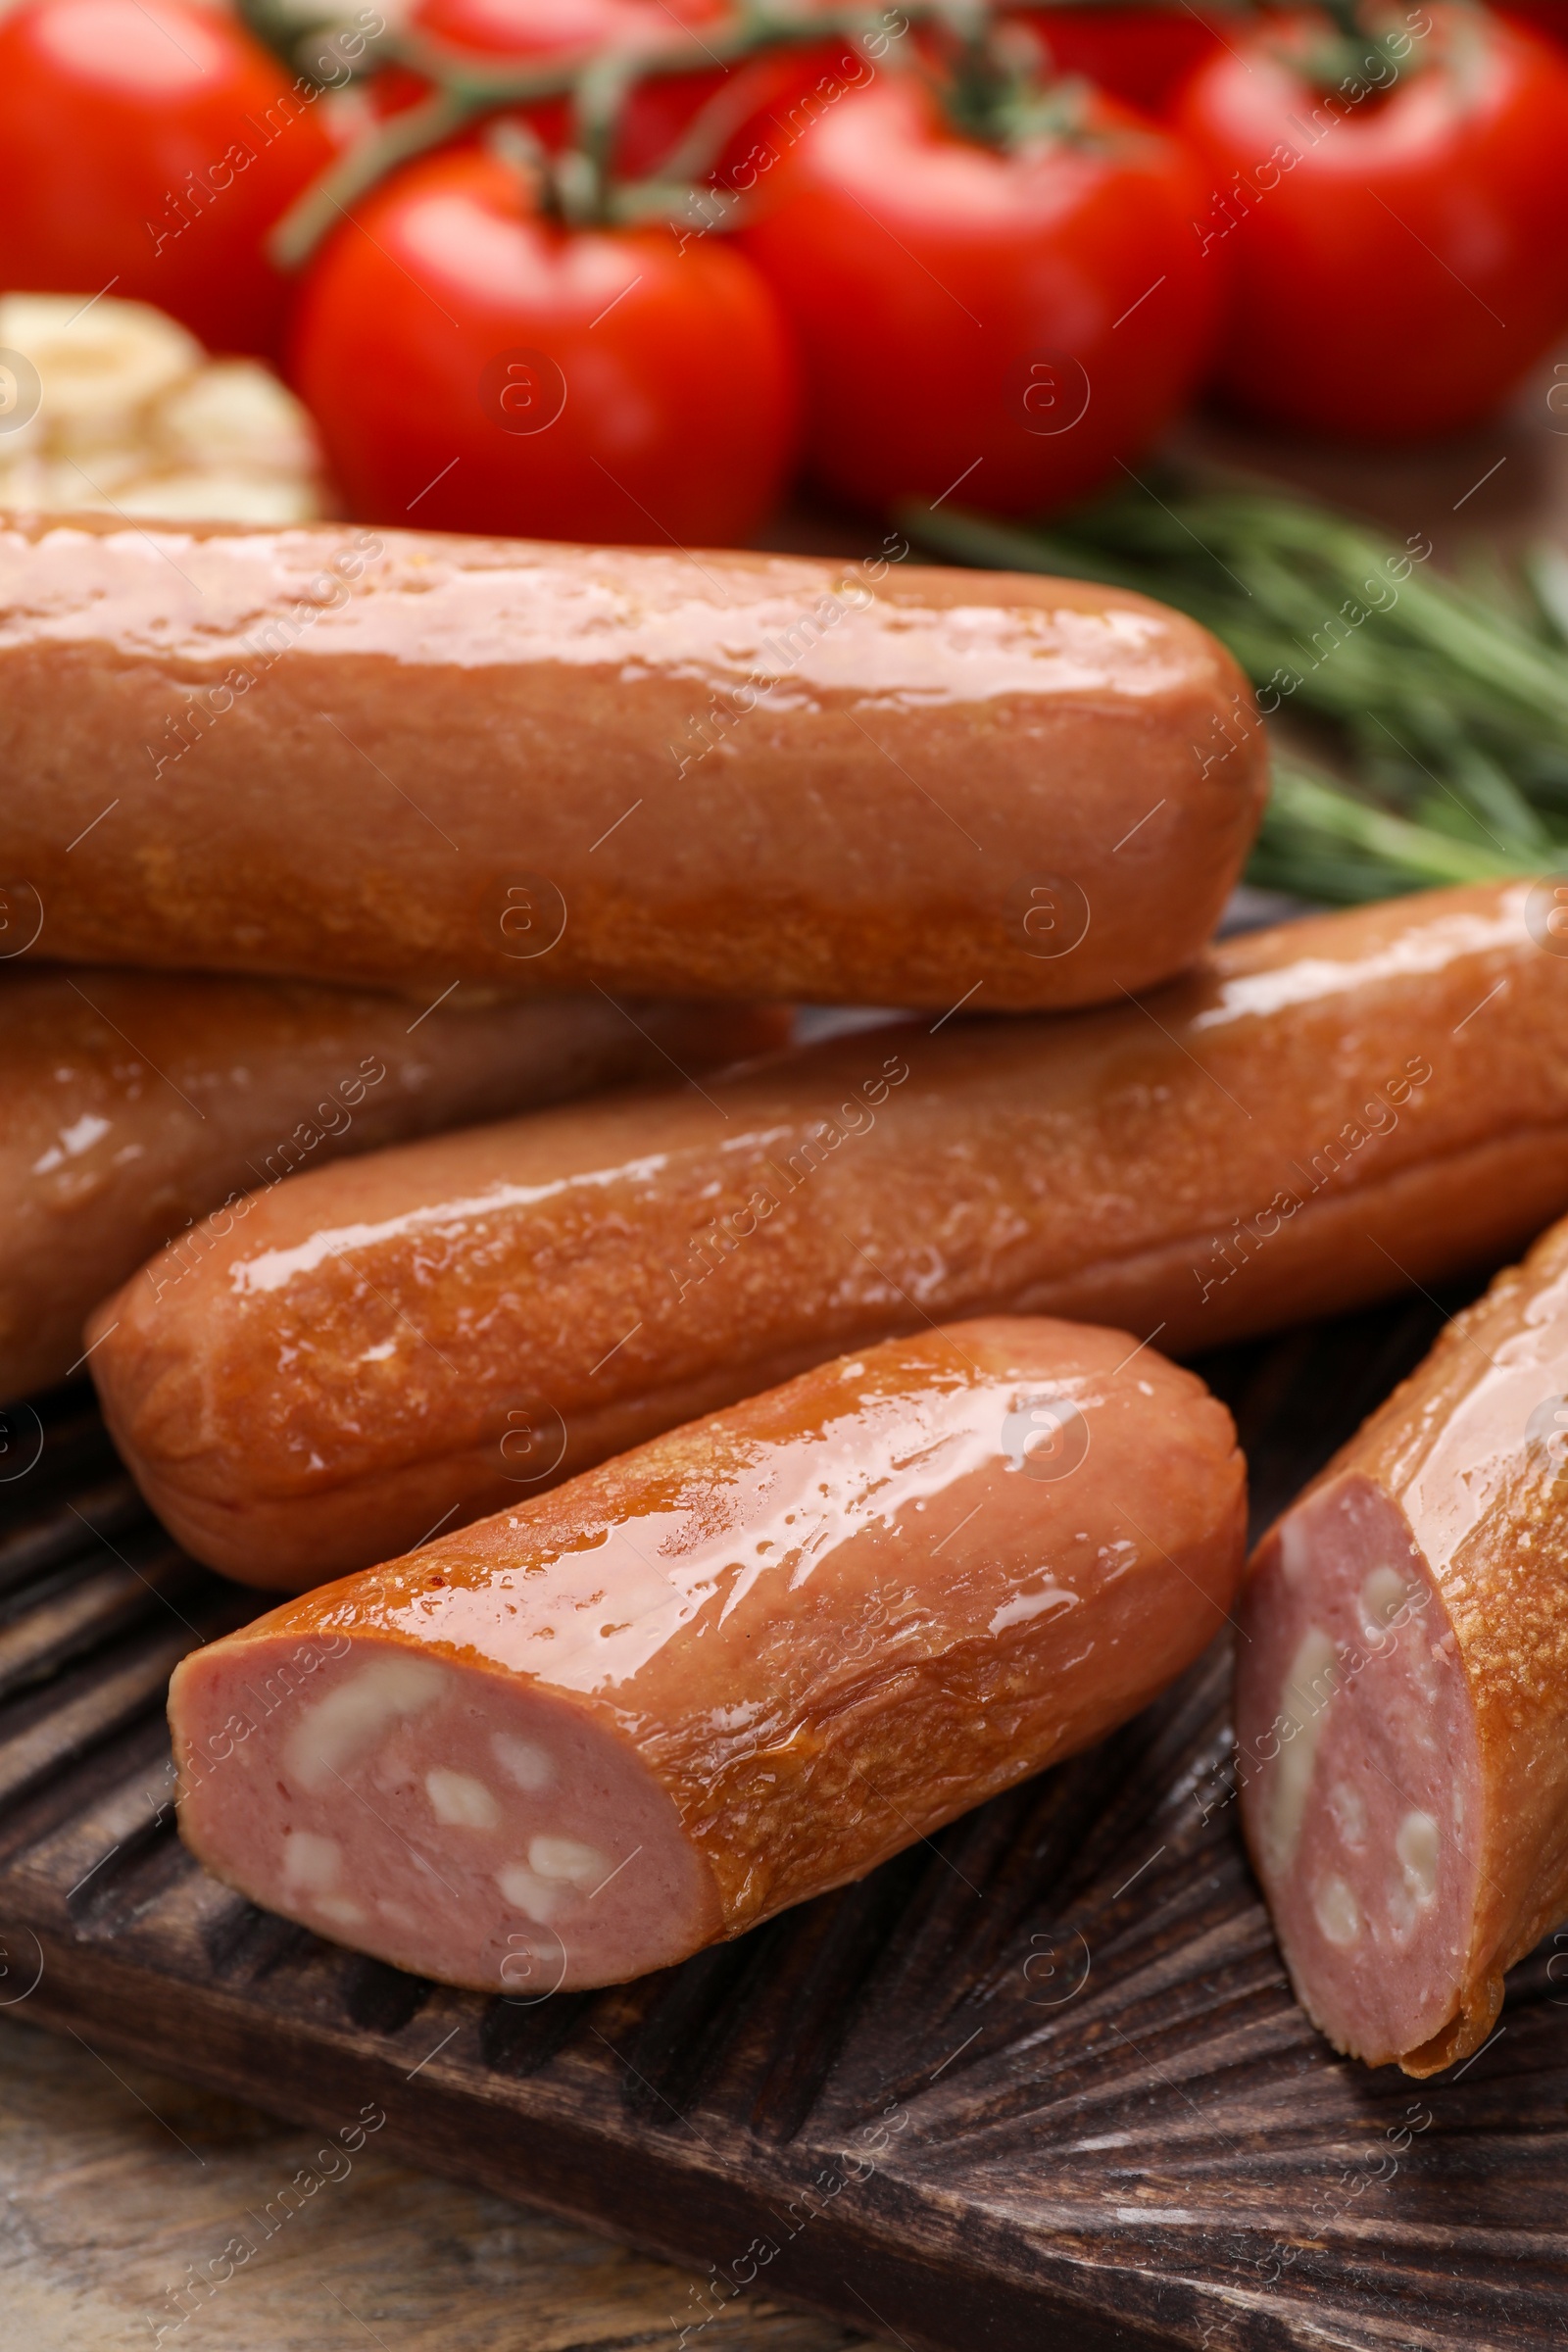 Photo of Delicious vegan sausages and tomatoes on wooden table, closeup